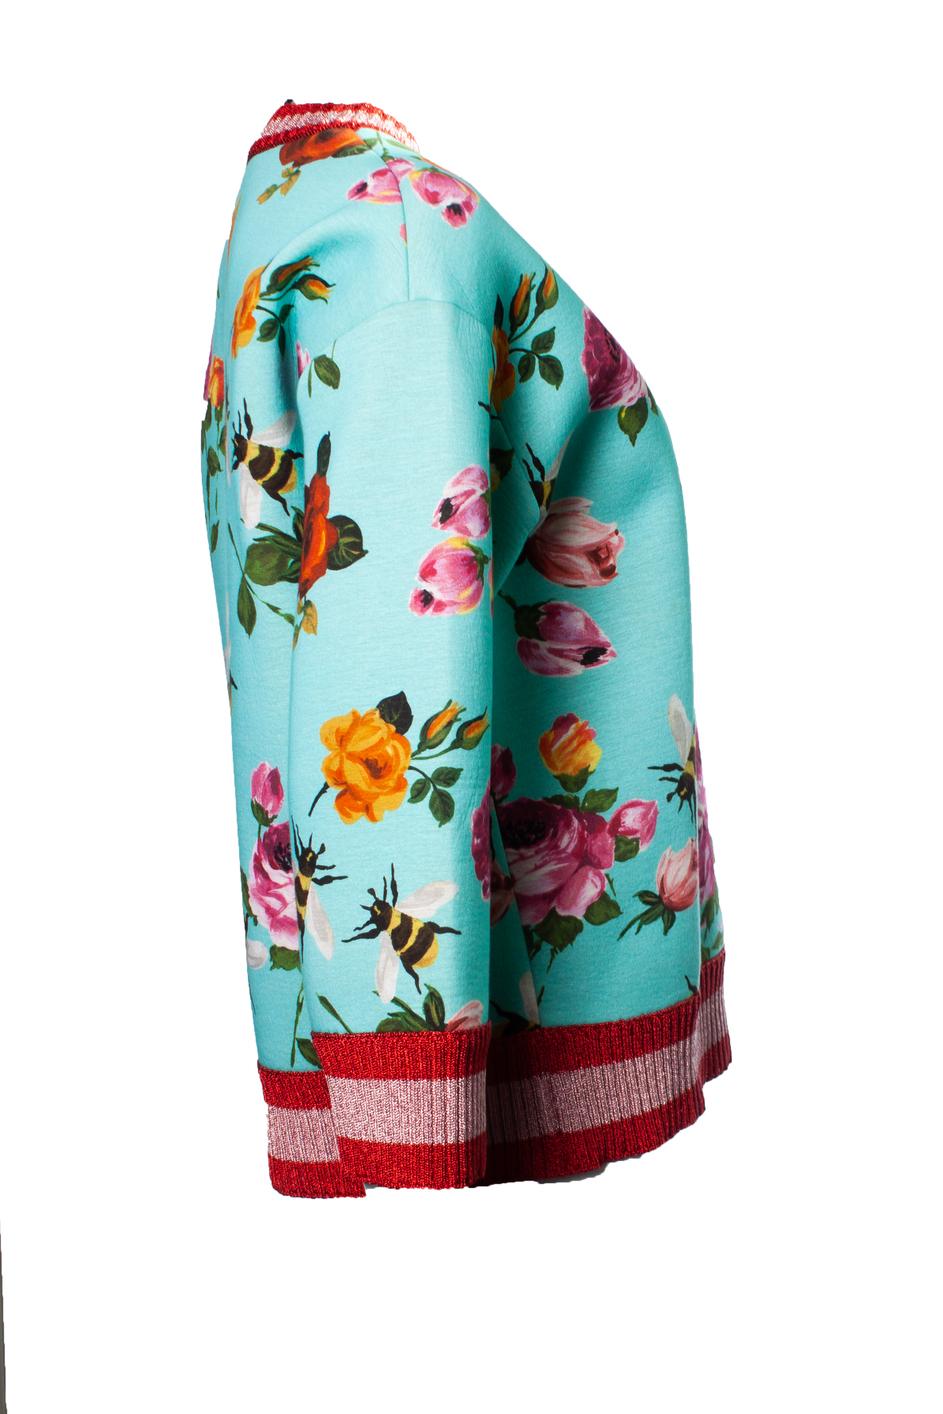 Gucci, Lurex sweater in turquoise with bees and roses print. The item is in very good condition.

• CONDITION: very good condition 

• SIZE: M 

• MEASUREMENTS: length 61 cm, width 55 cm, waist 53 cm, shoulder width 52 cm, sleeve length 44 cm

•